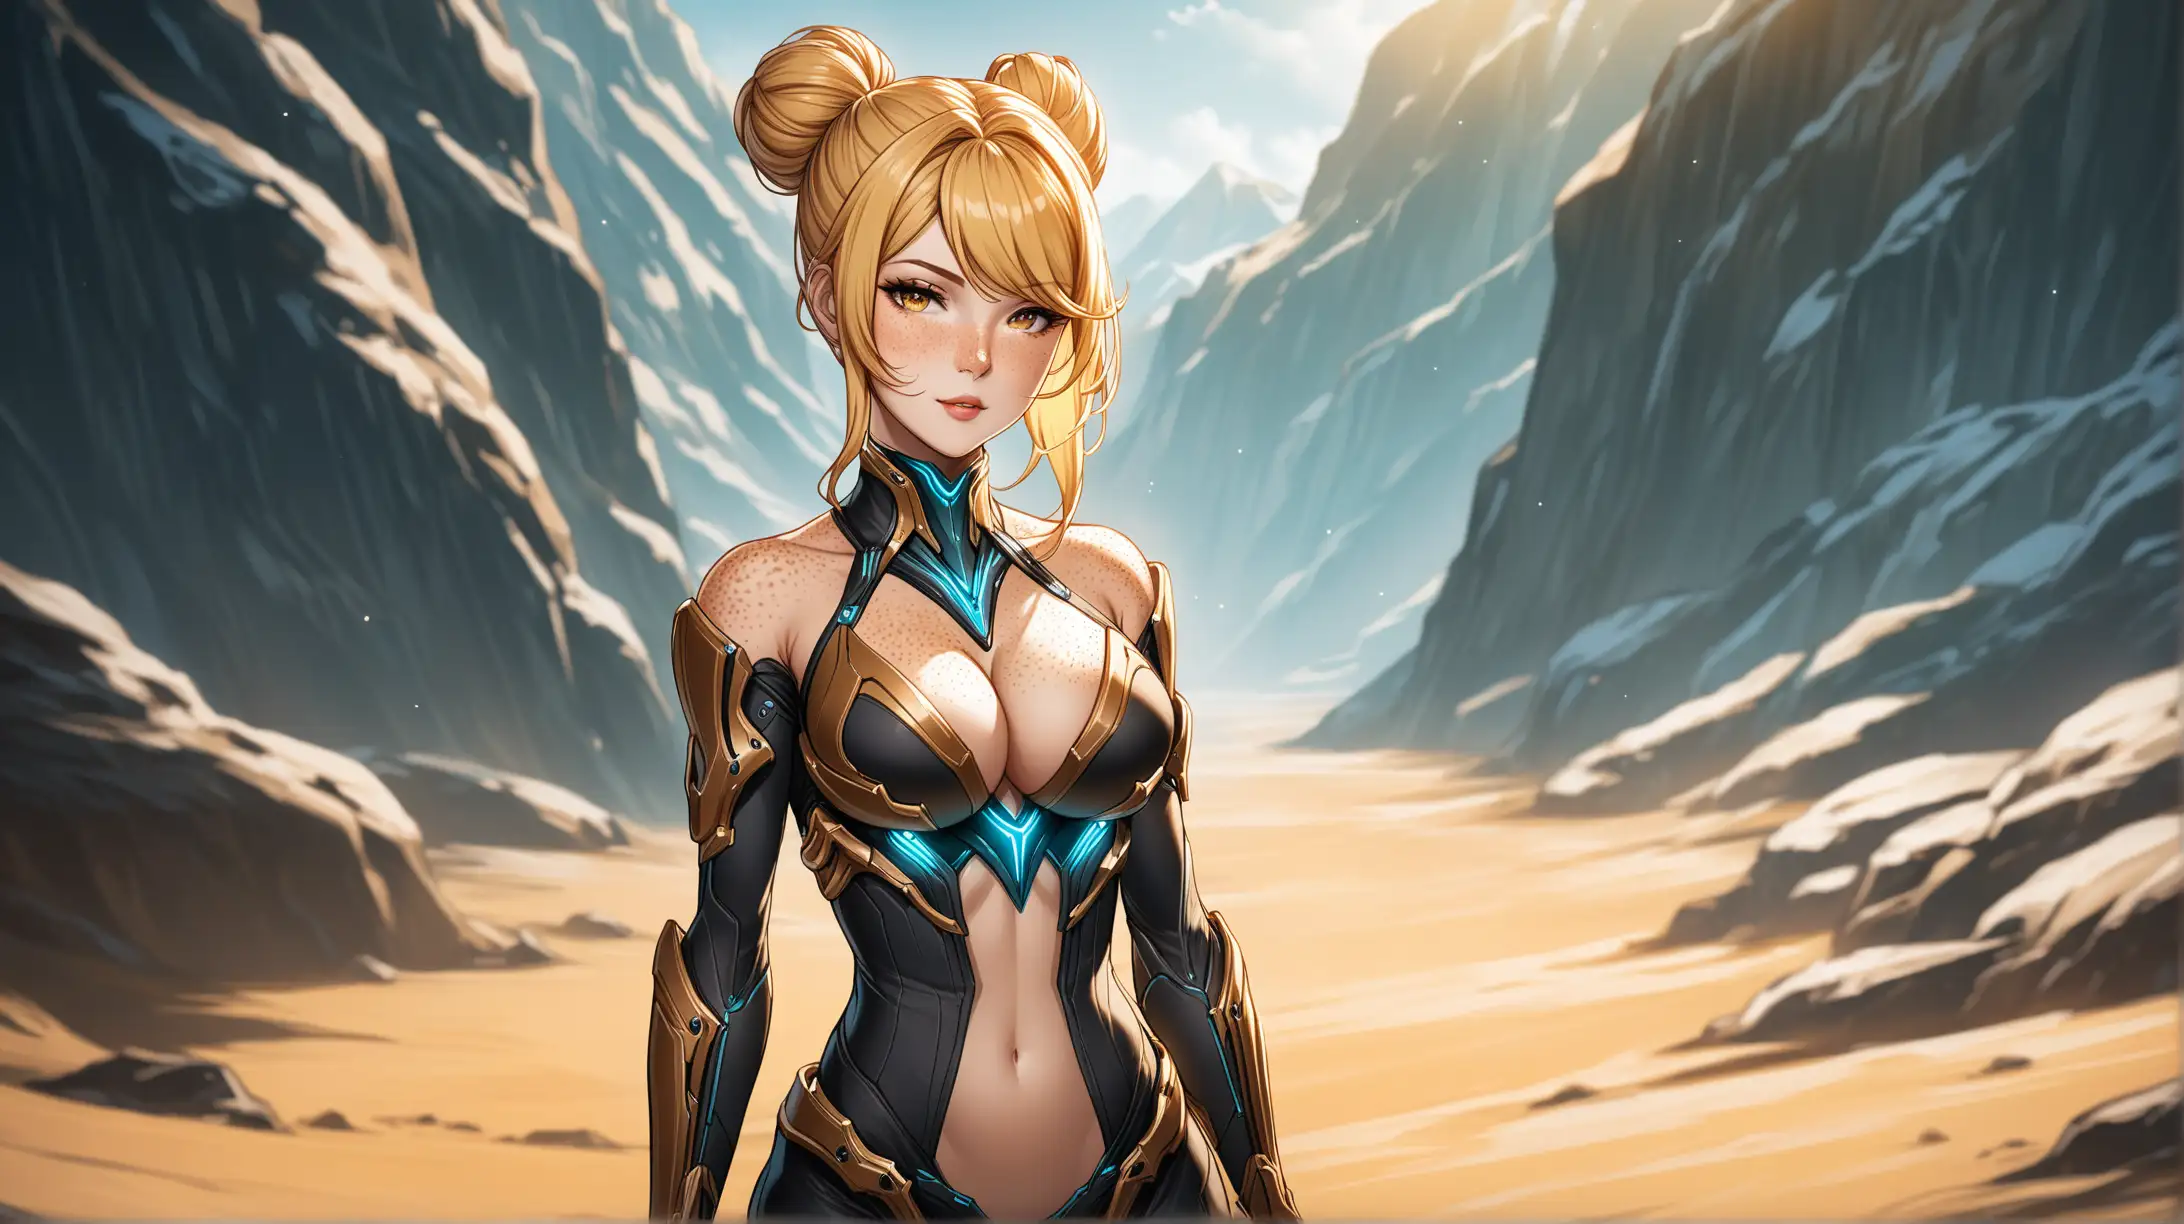 Draw a woman, long blonde hair in a bun, gold eyes, freckles, perky figure, outfit inspired from the game Warframe, high quality, cowboy shot, outdoors, seductive pose, cleavage, natural lighting, looking at the viewer lovingly